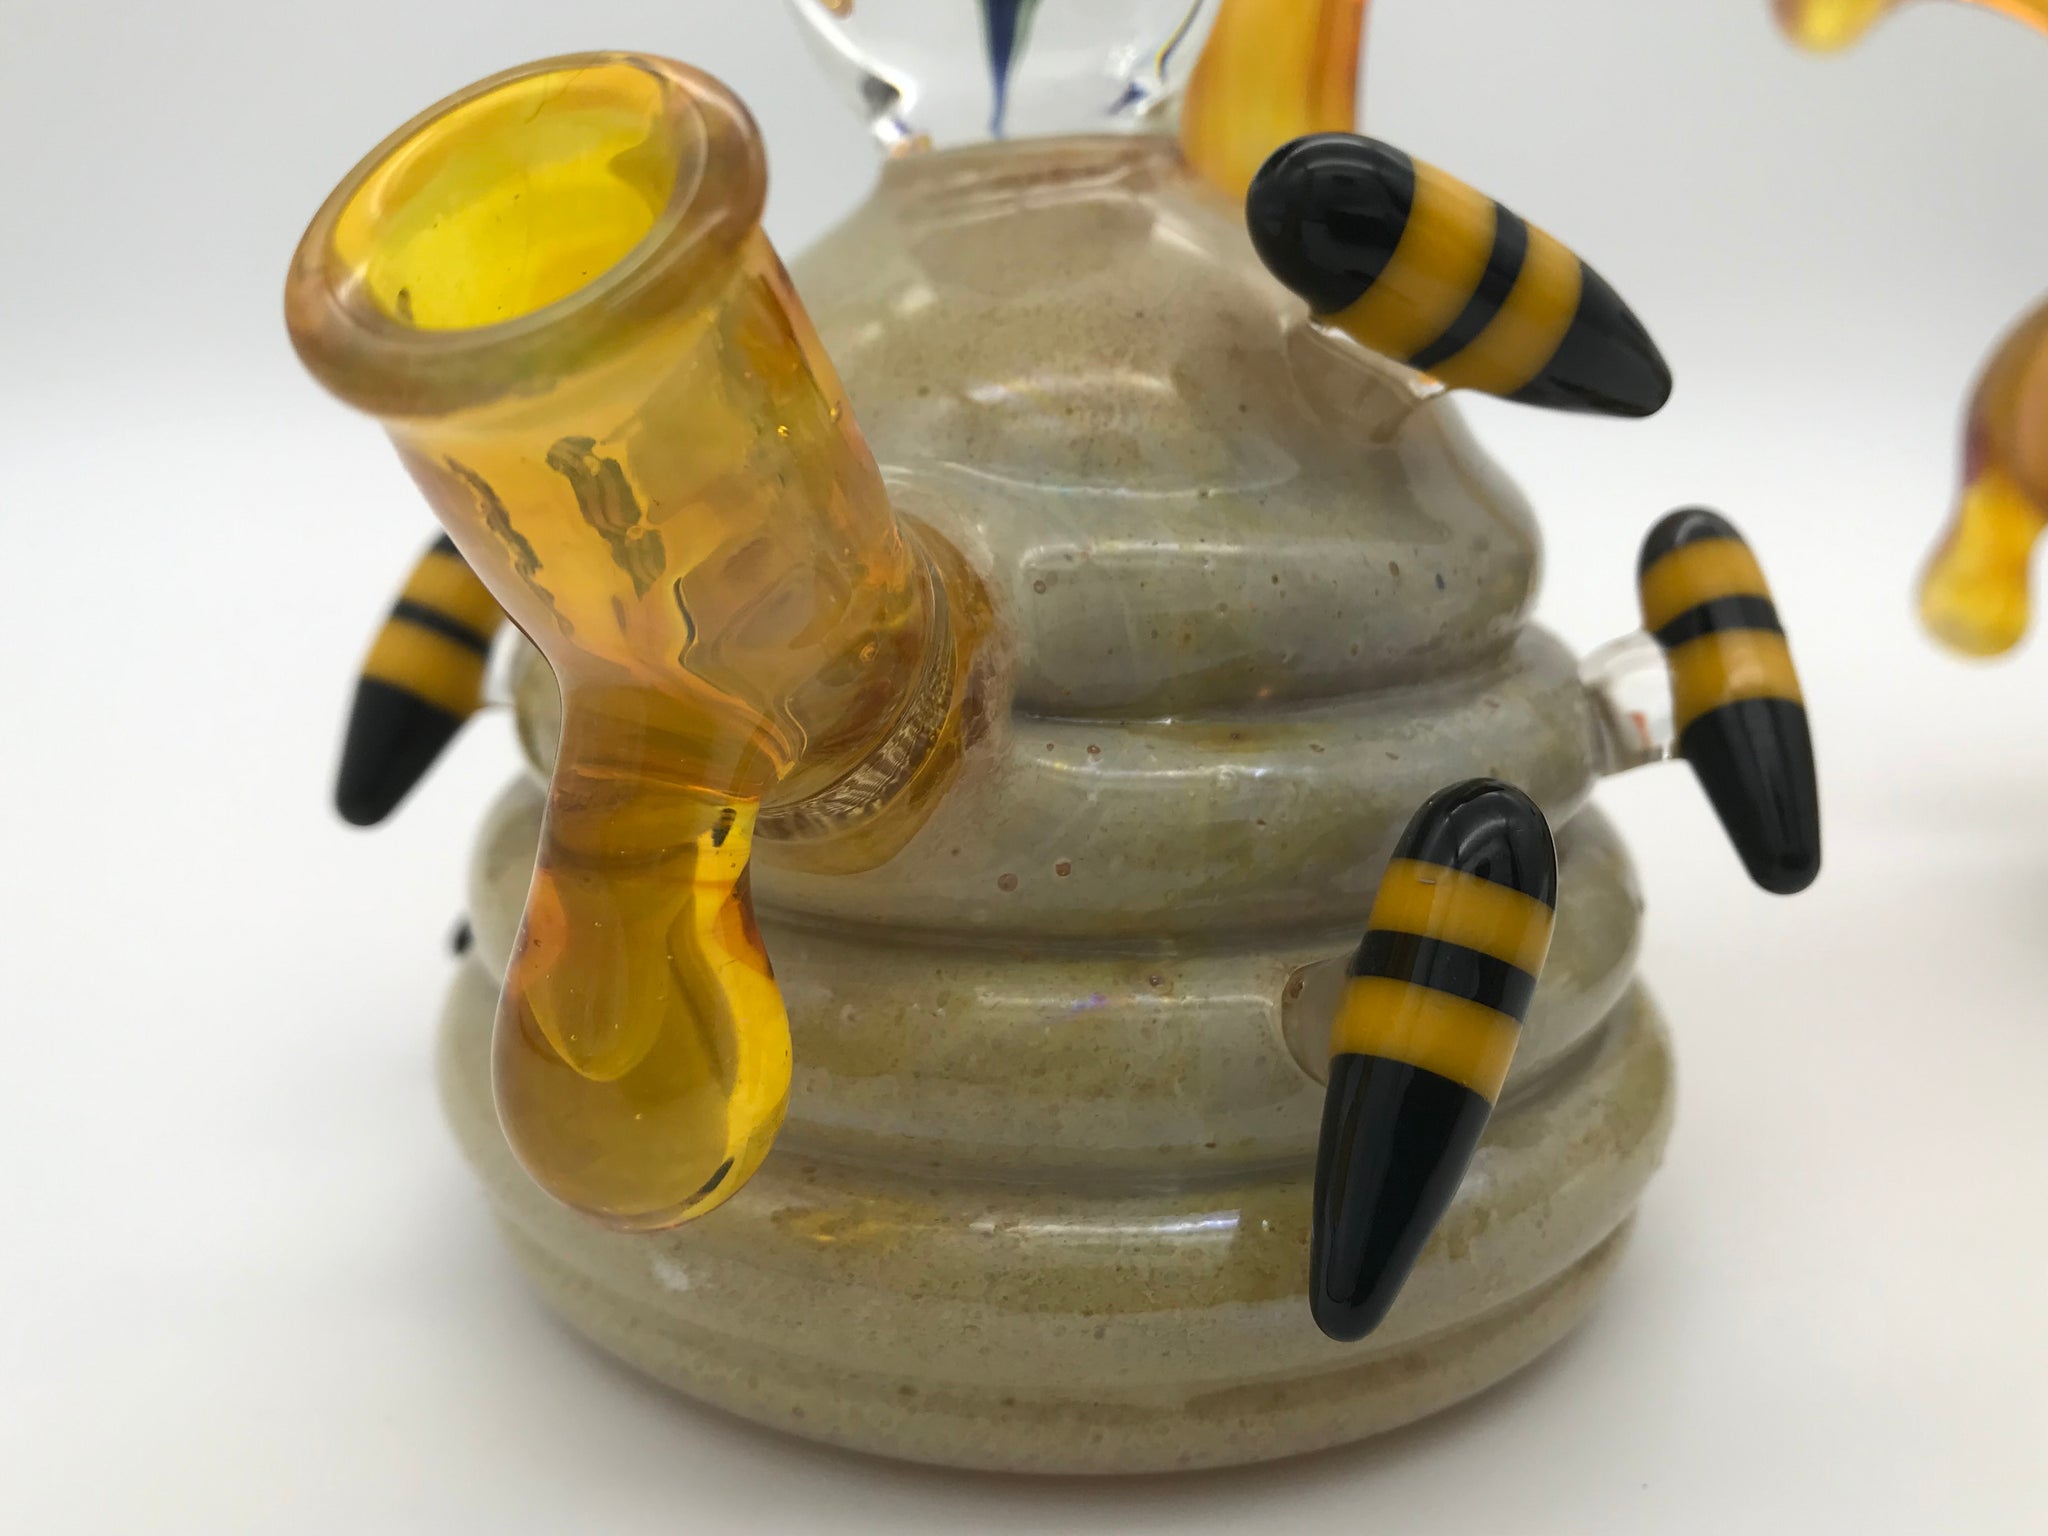 Muph Hive rig